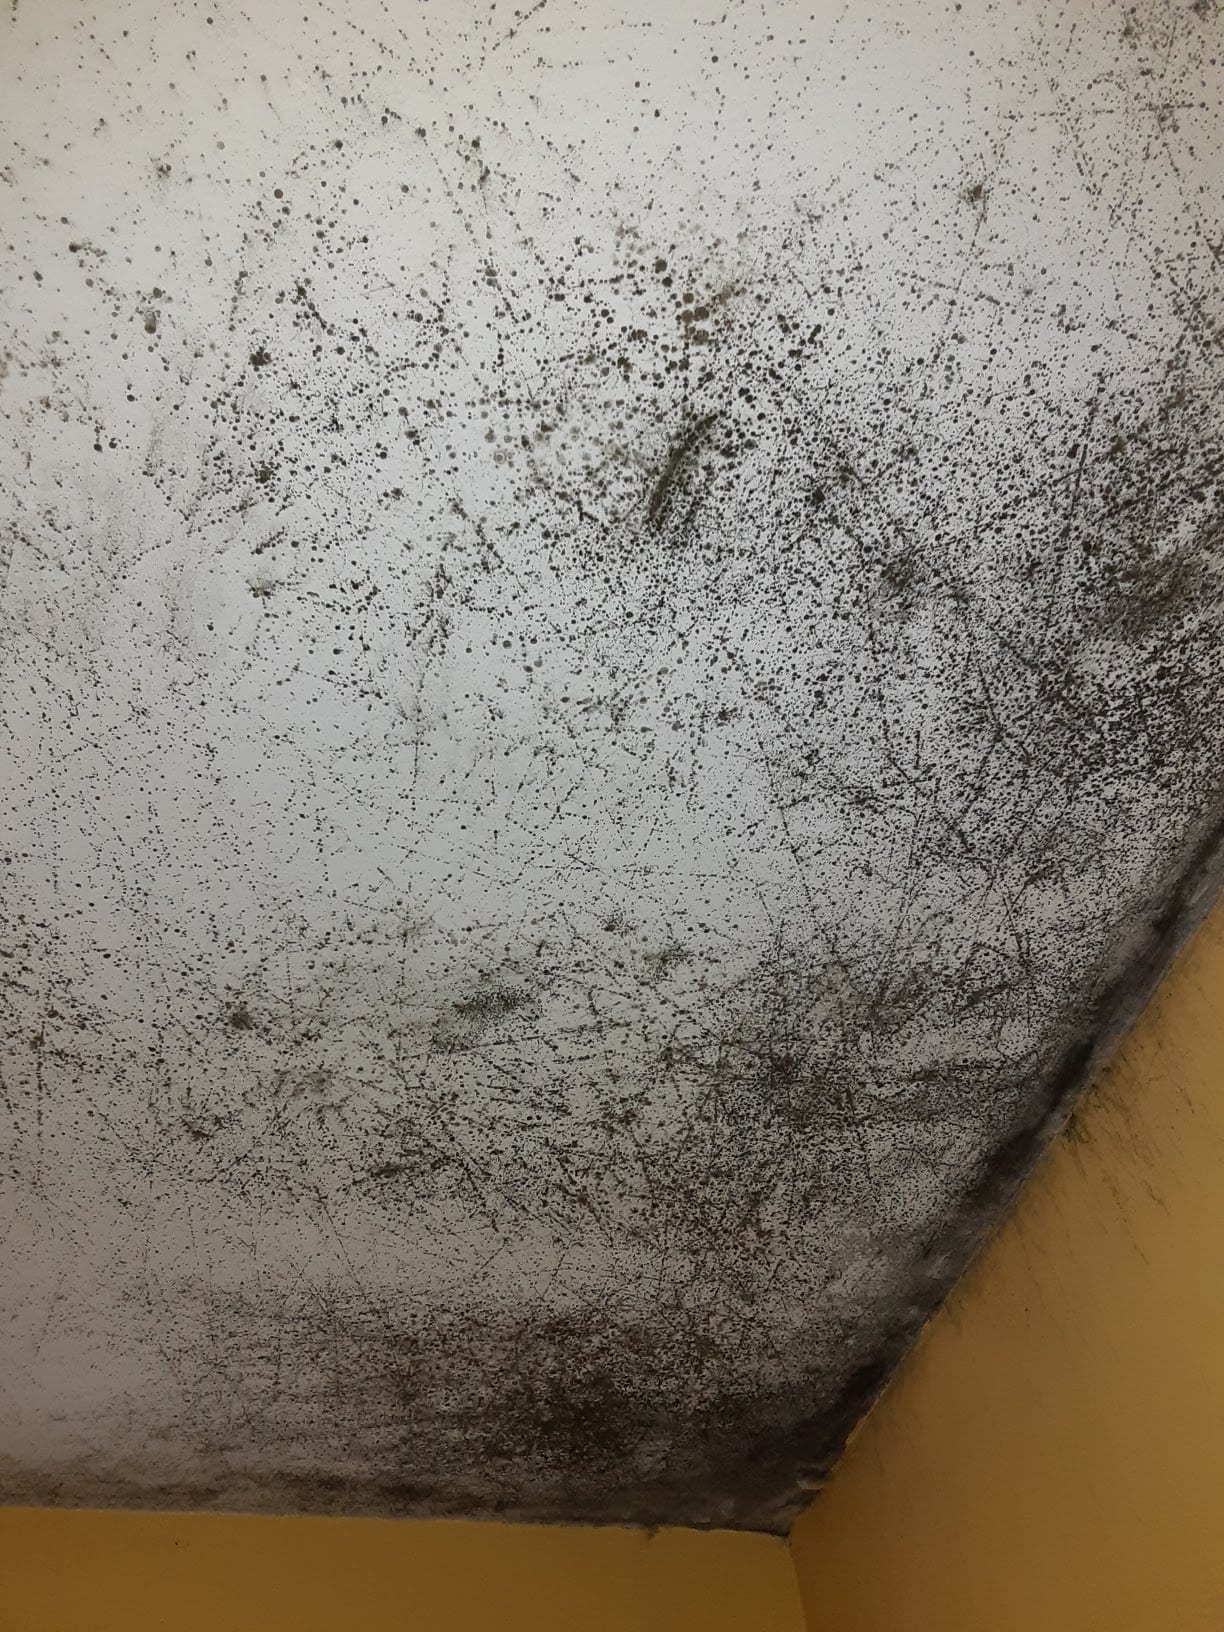 Mold on ceiling of house